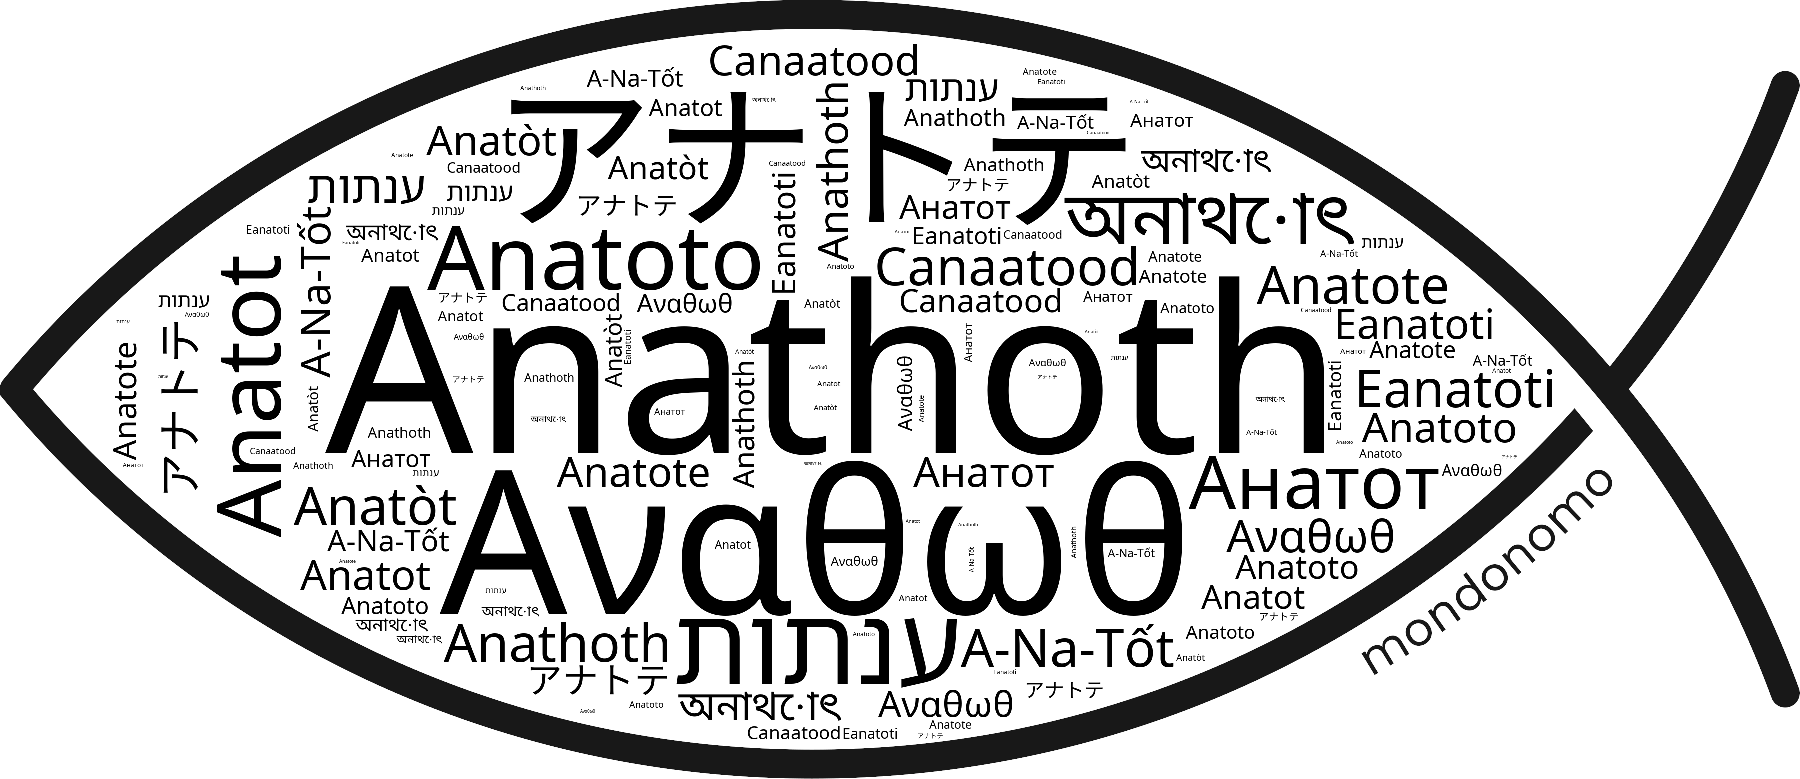 Name Anathoth in the world's Bibles